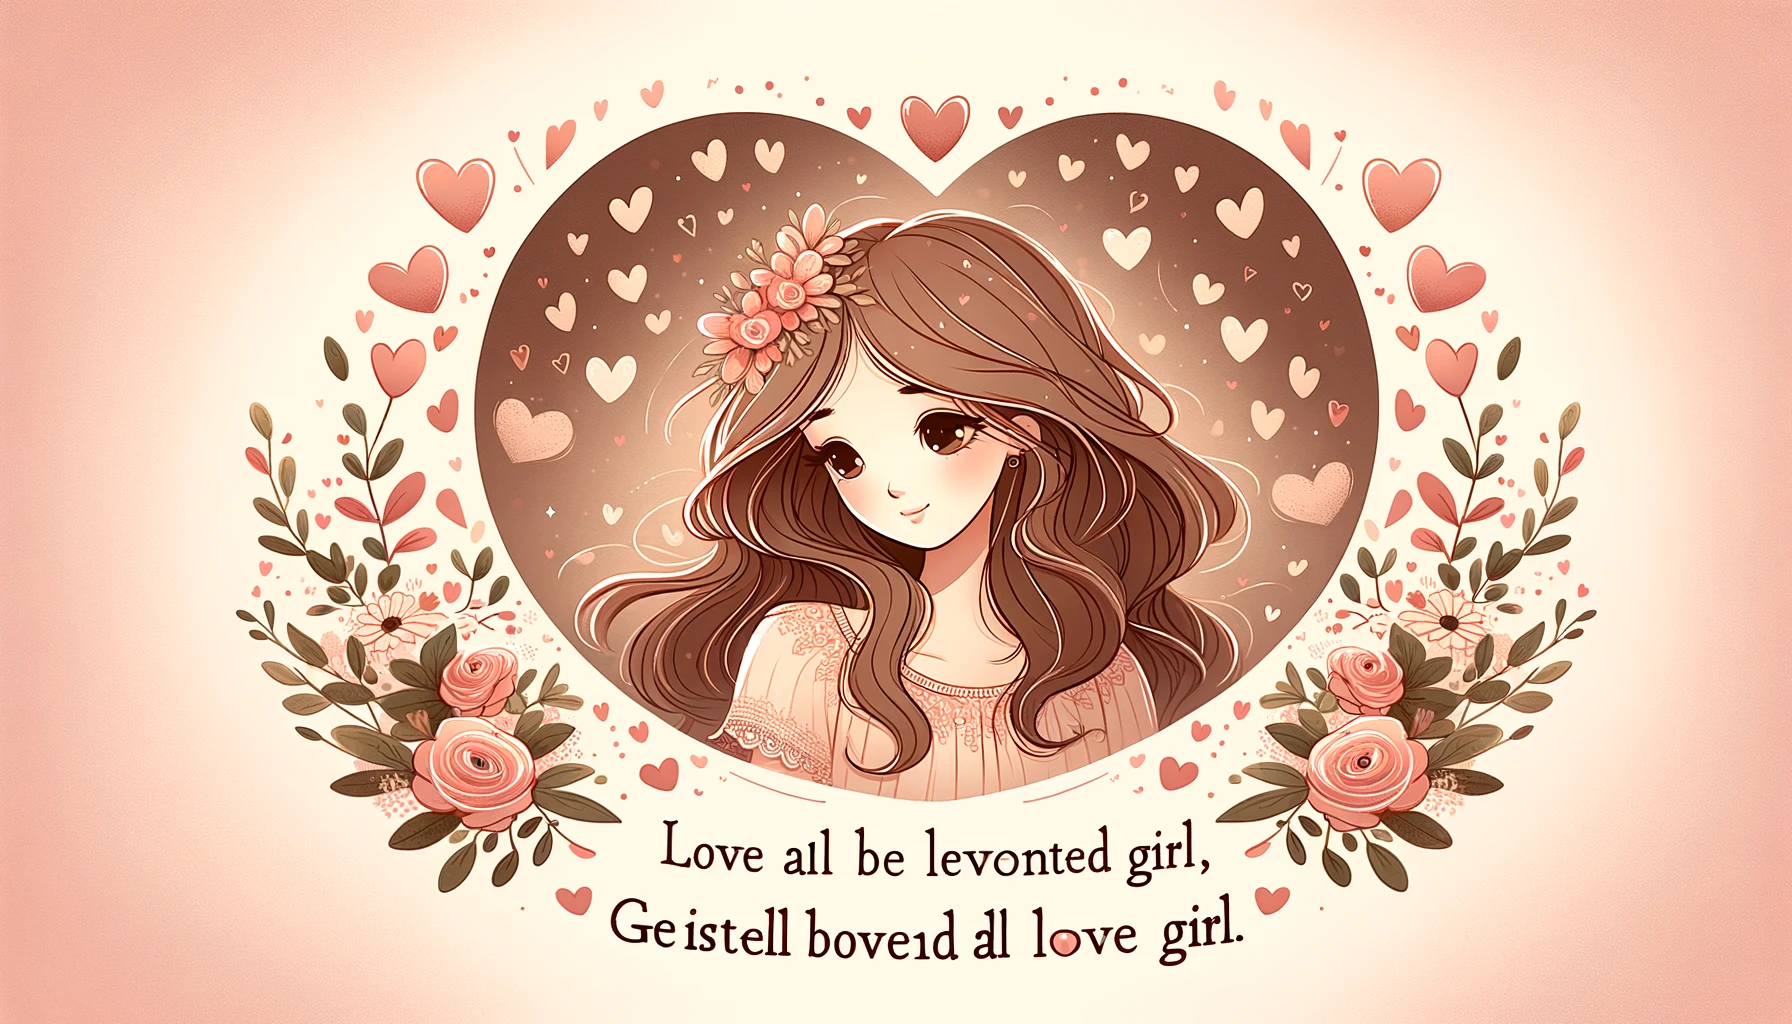 Heartfelt Wishes, Text Messages, and Images for Your Beloved Girlfriend